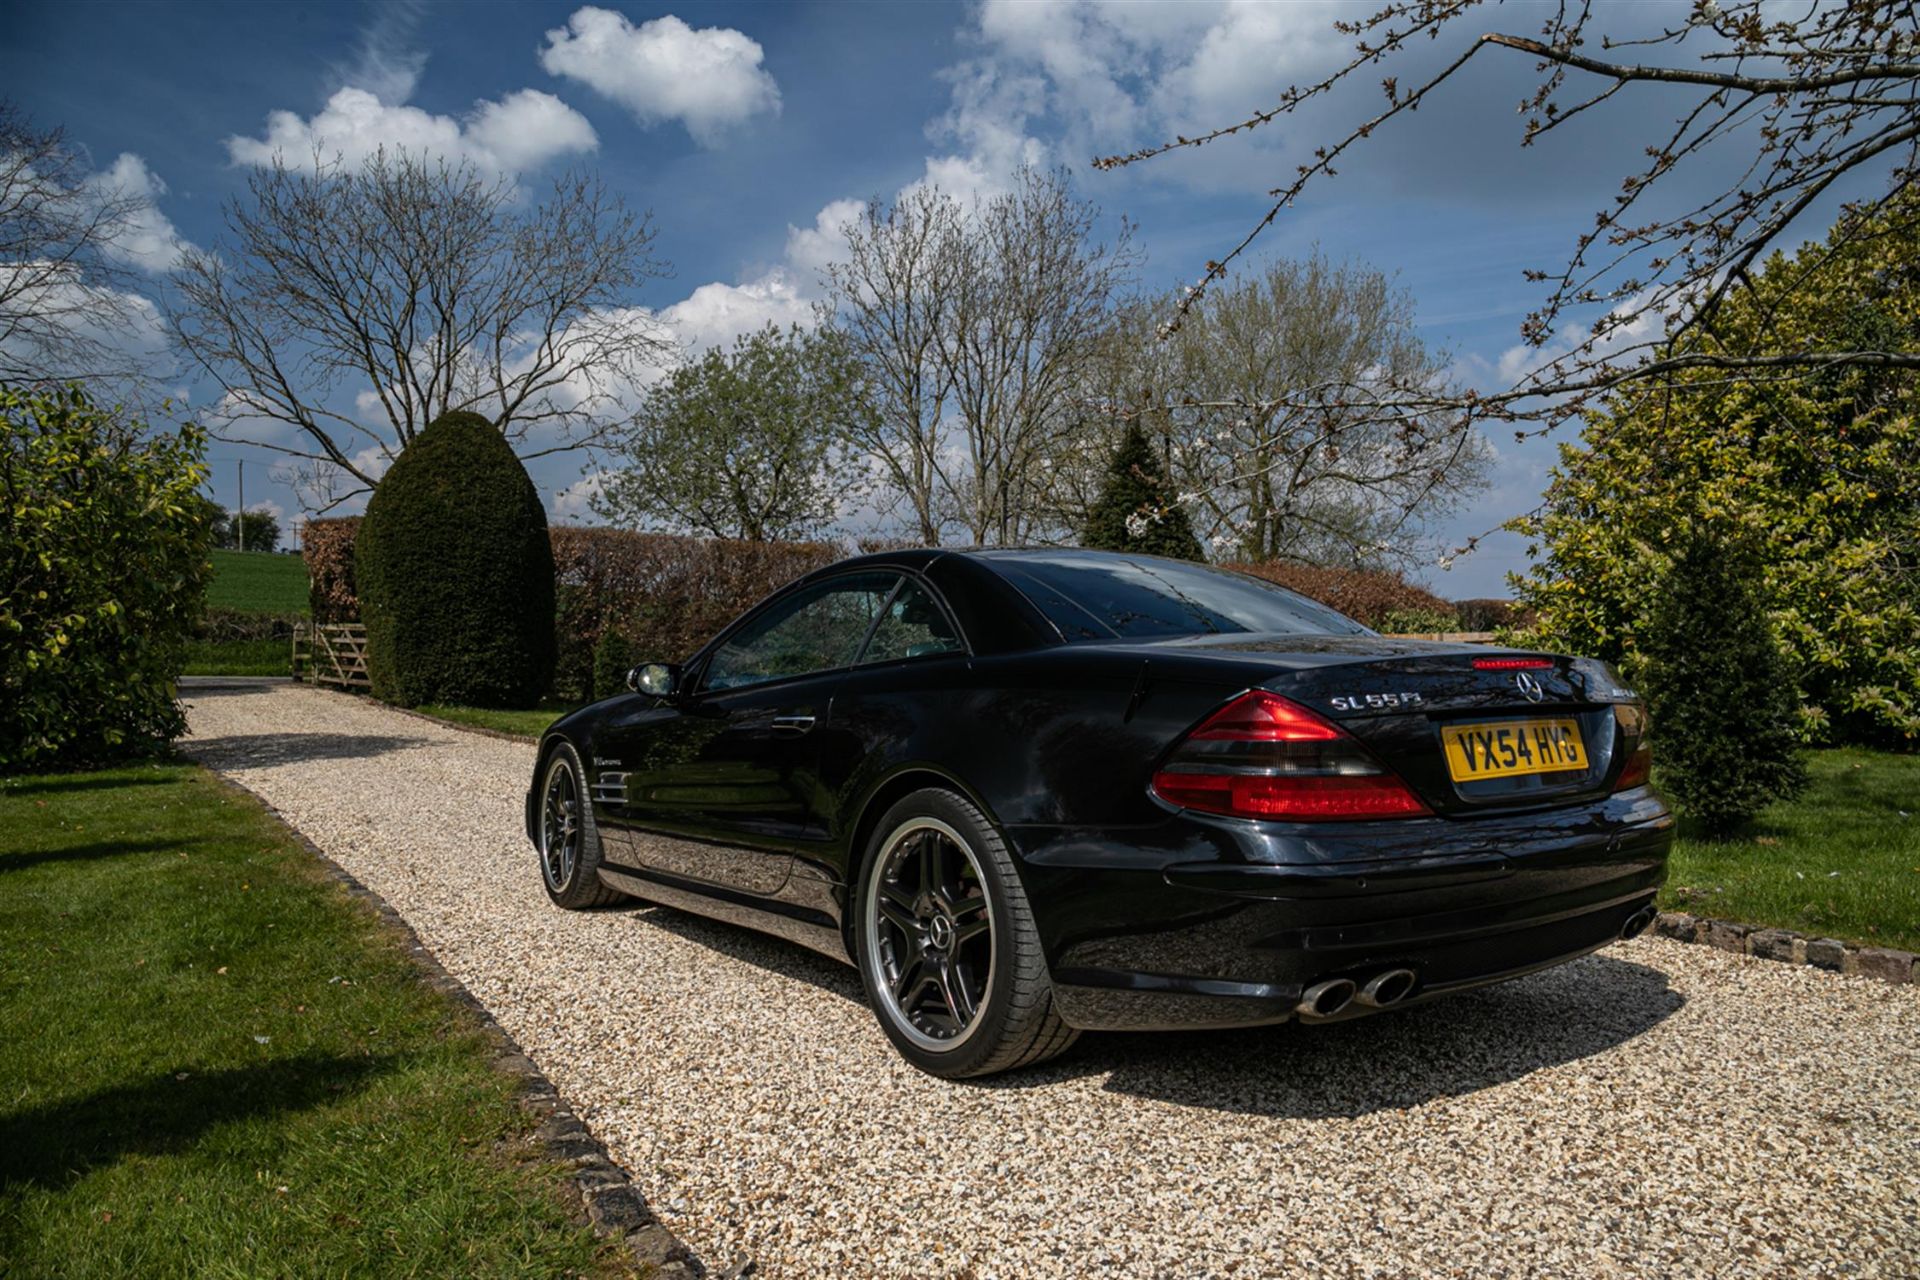 2004 Mercedes-Benz SL55 (R230) 'F1 Performance Pack' - Image 10 of 10